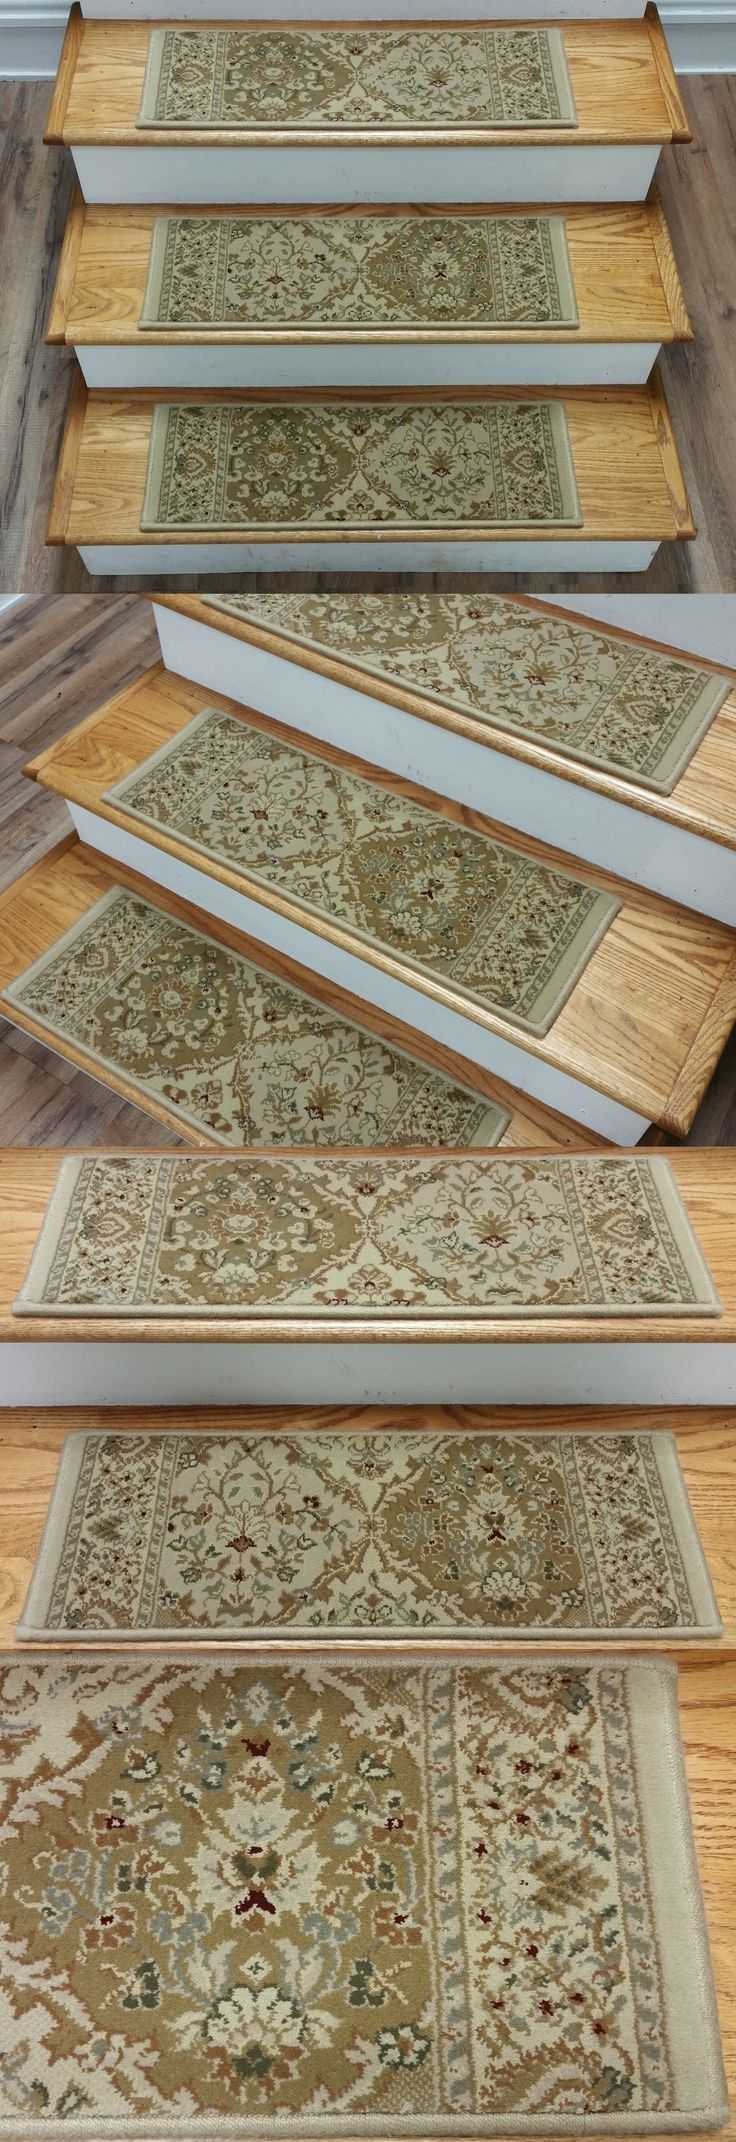 Popular Photo of Carpet Stair Treads And Rugs 9×